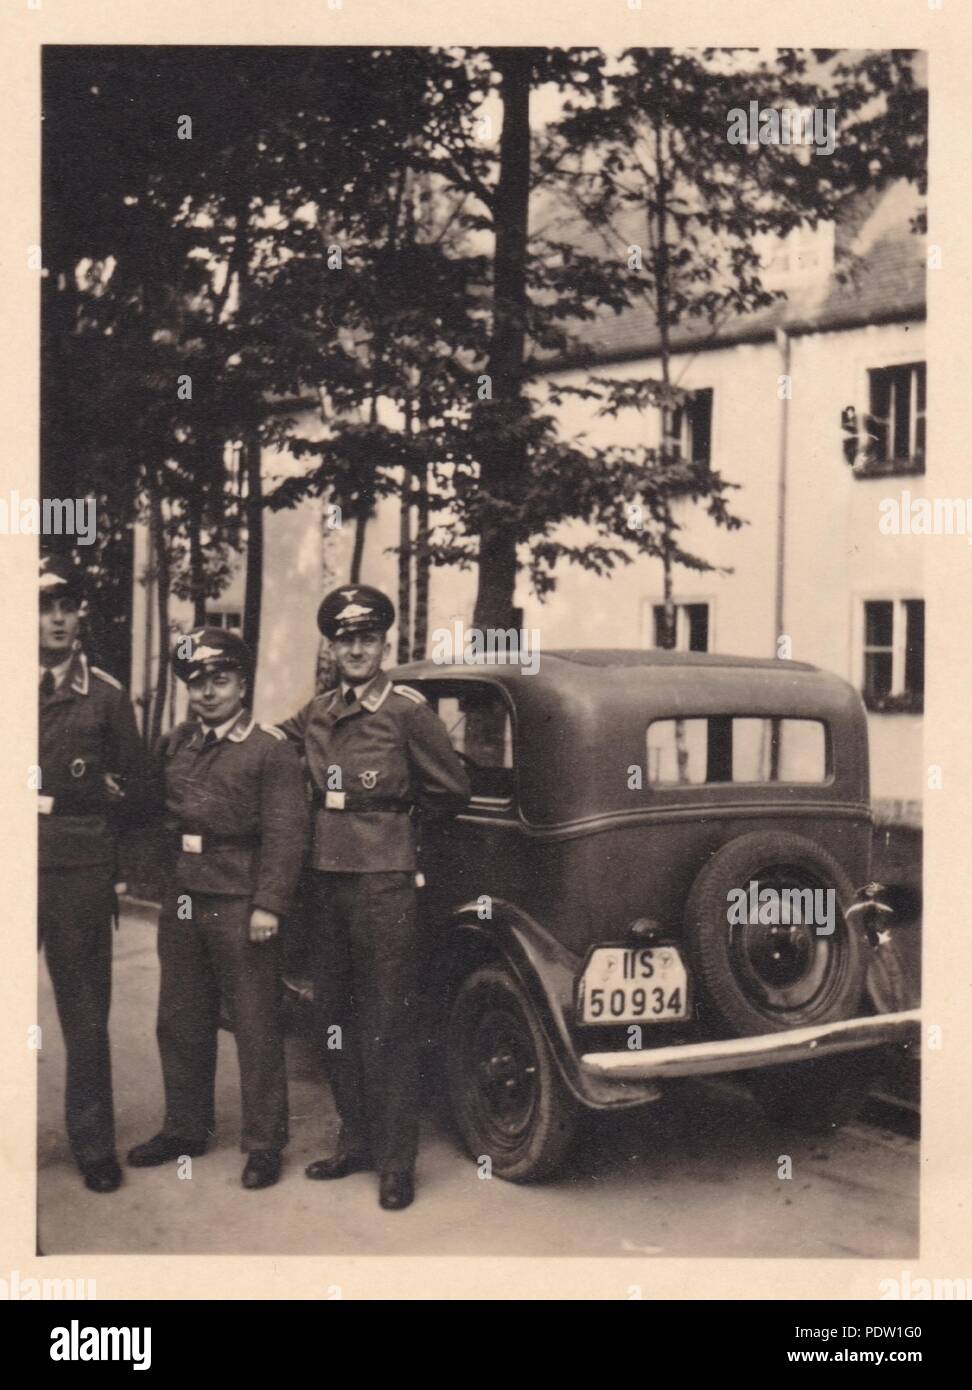 Image from the photo album of Oberfeldwebel Karl Gendner of 1. Staffel, Kampfgeschwader 40: Karl Gendner (centre) stands by his car with two colleagues, outside the barracks at Giebelstadt in 1938 Stock Photo